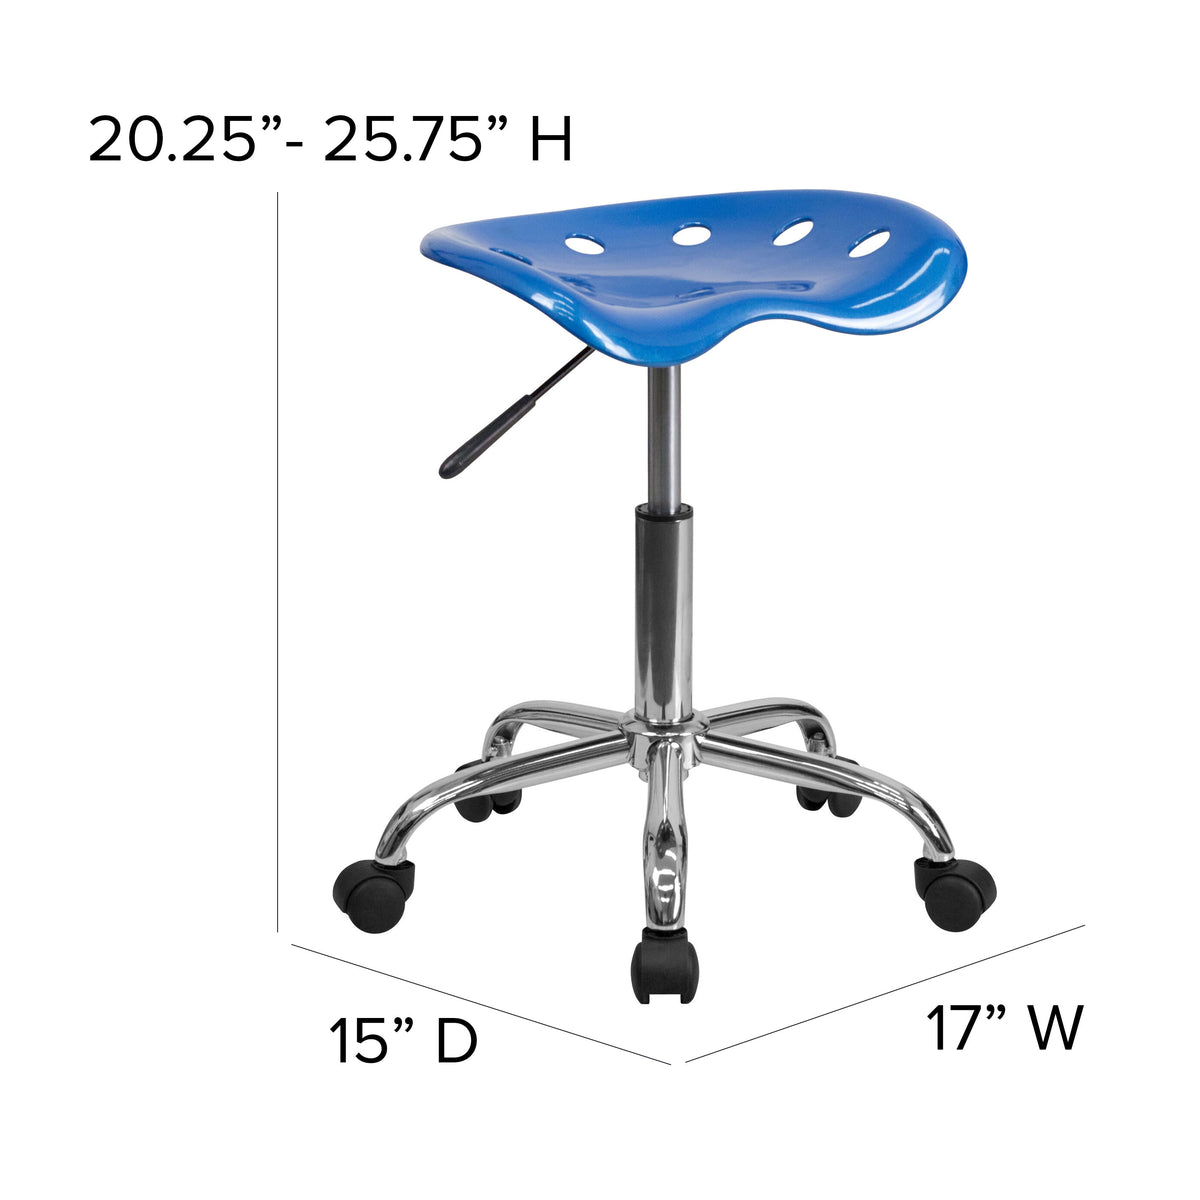 Bright Blue |#| Vibrant Bright Blue Tractor Seat and Chrome Stool - Drafting & Office Stools